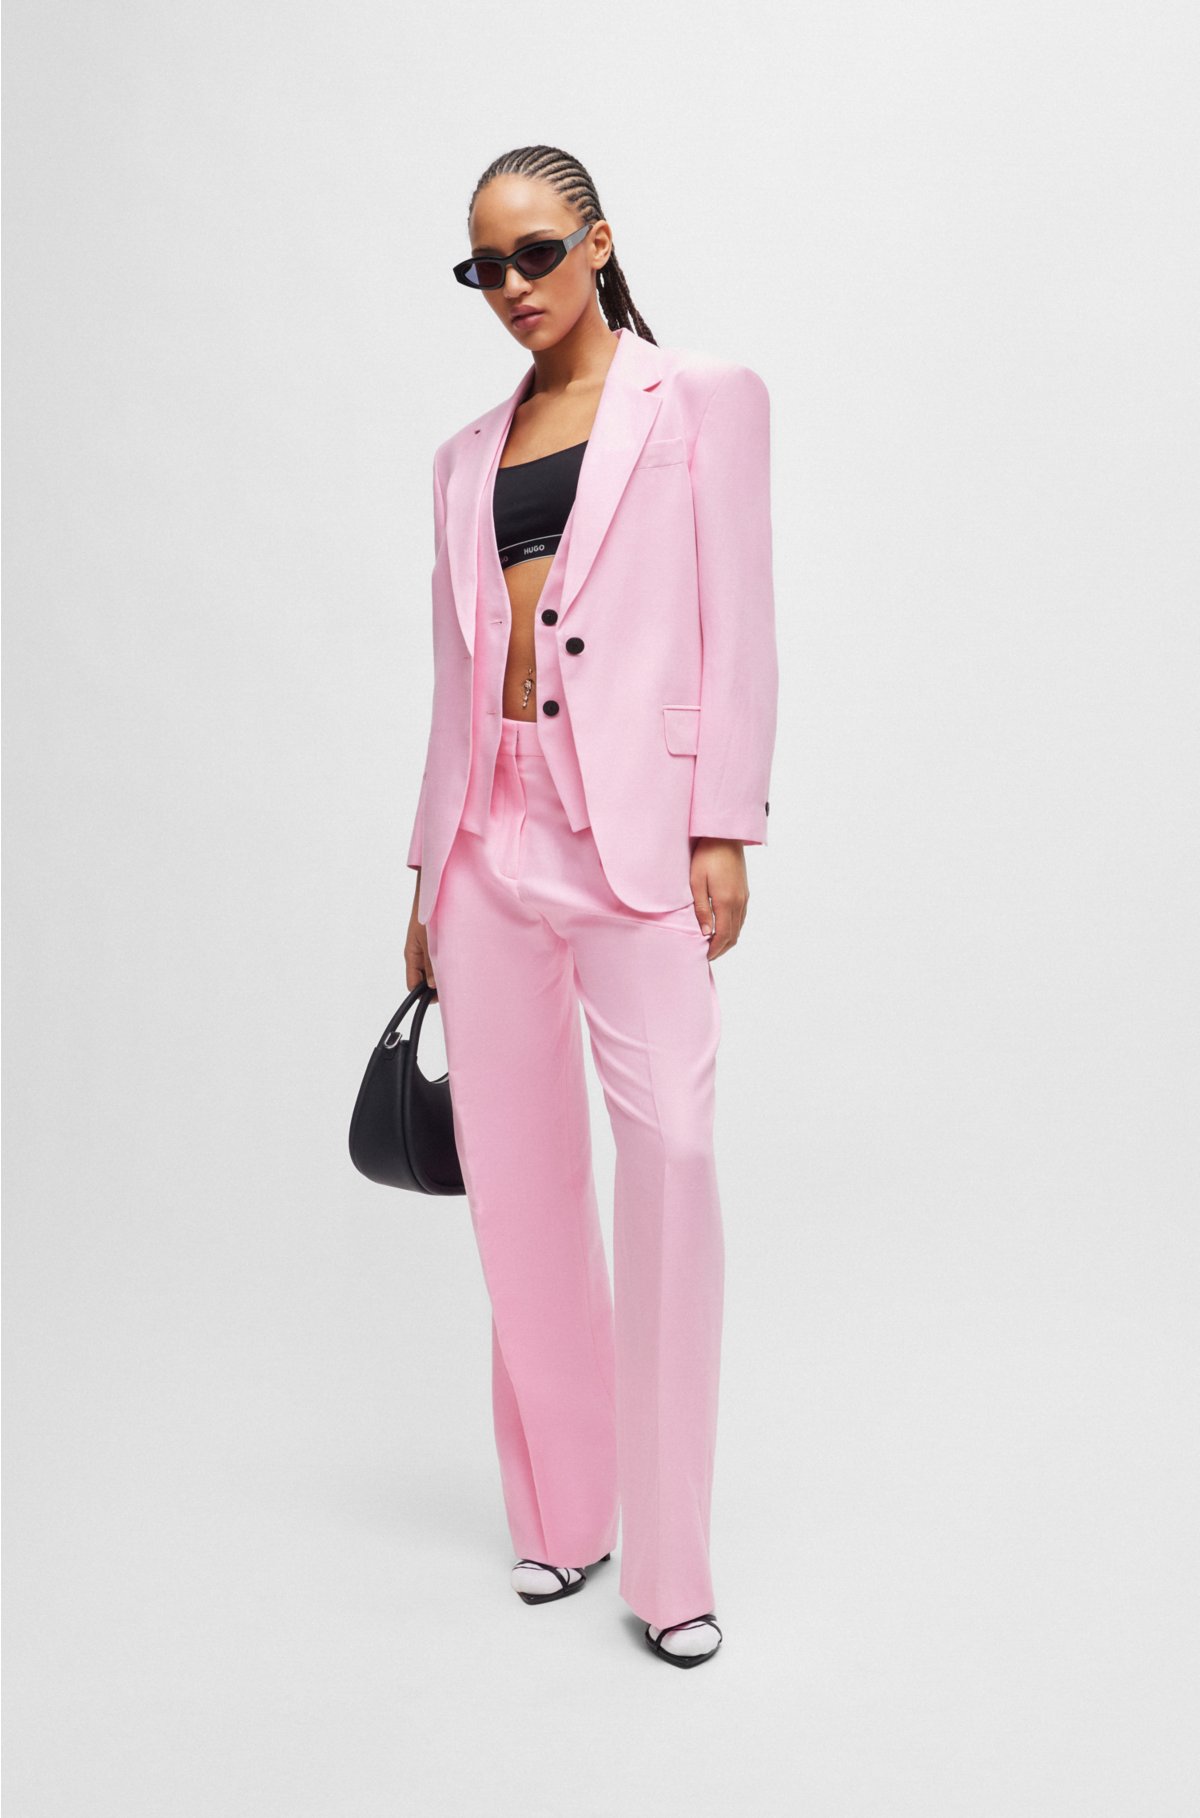 Light Pink Formal Pantsuit for Women, Business Casual Suit for Women, Lady  Boss Outfit for Office and Business Meetings -  Singapore